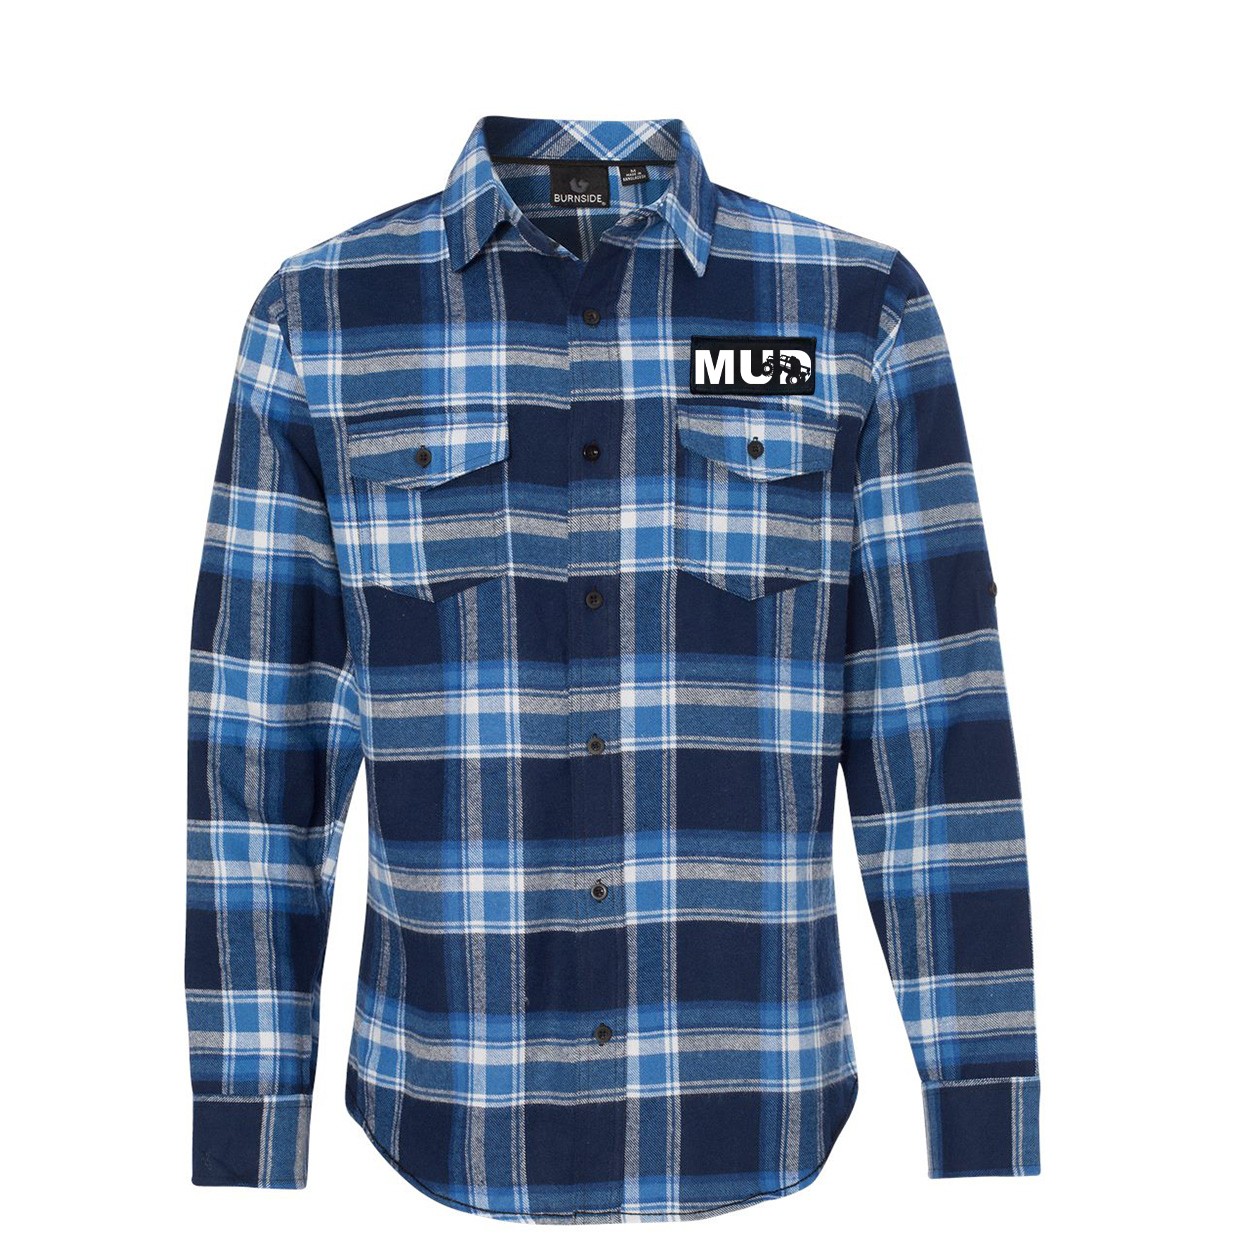 Mud Truck Logo Classic Unisex Long Sleeve Woven Patch Flannel Shirt Blue/White (White Logo)